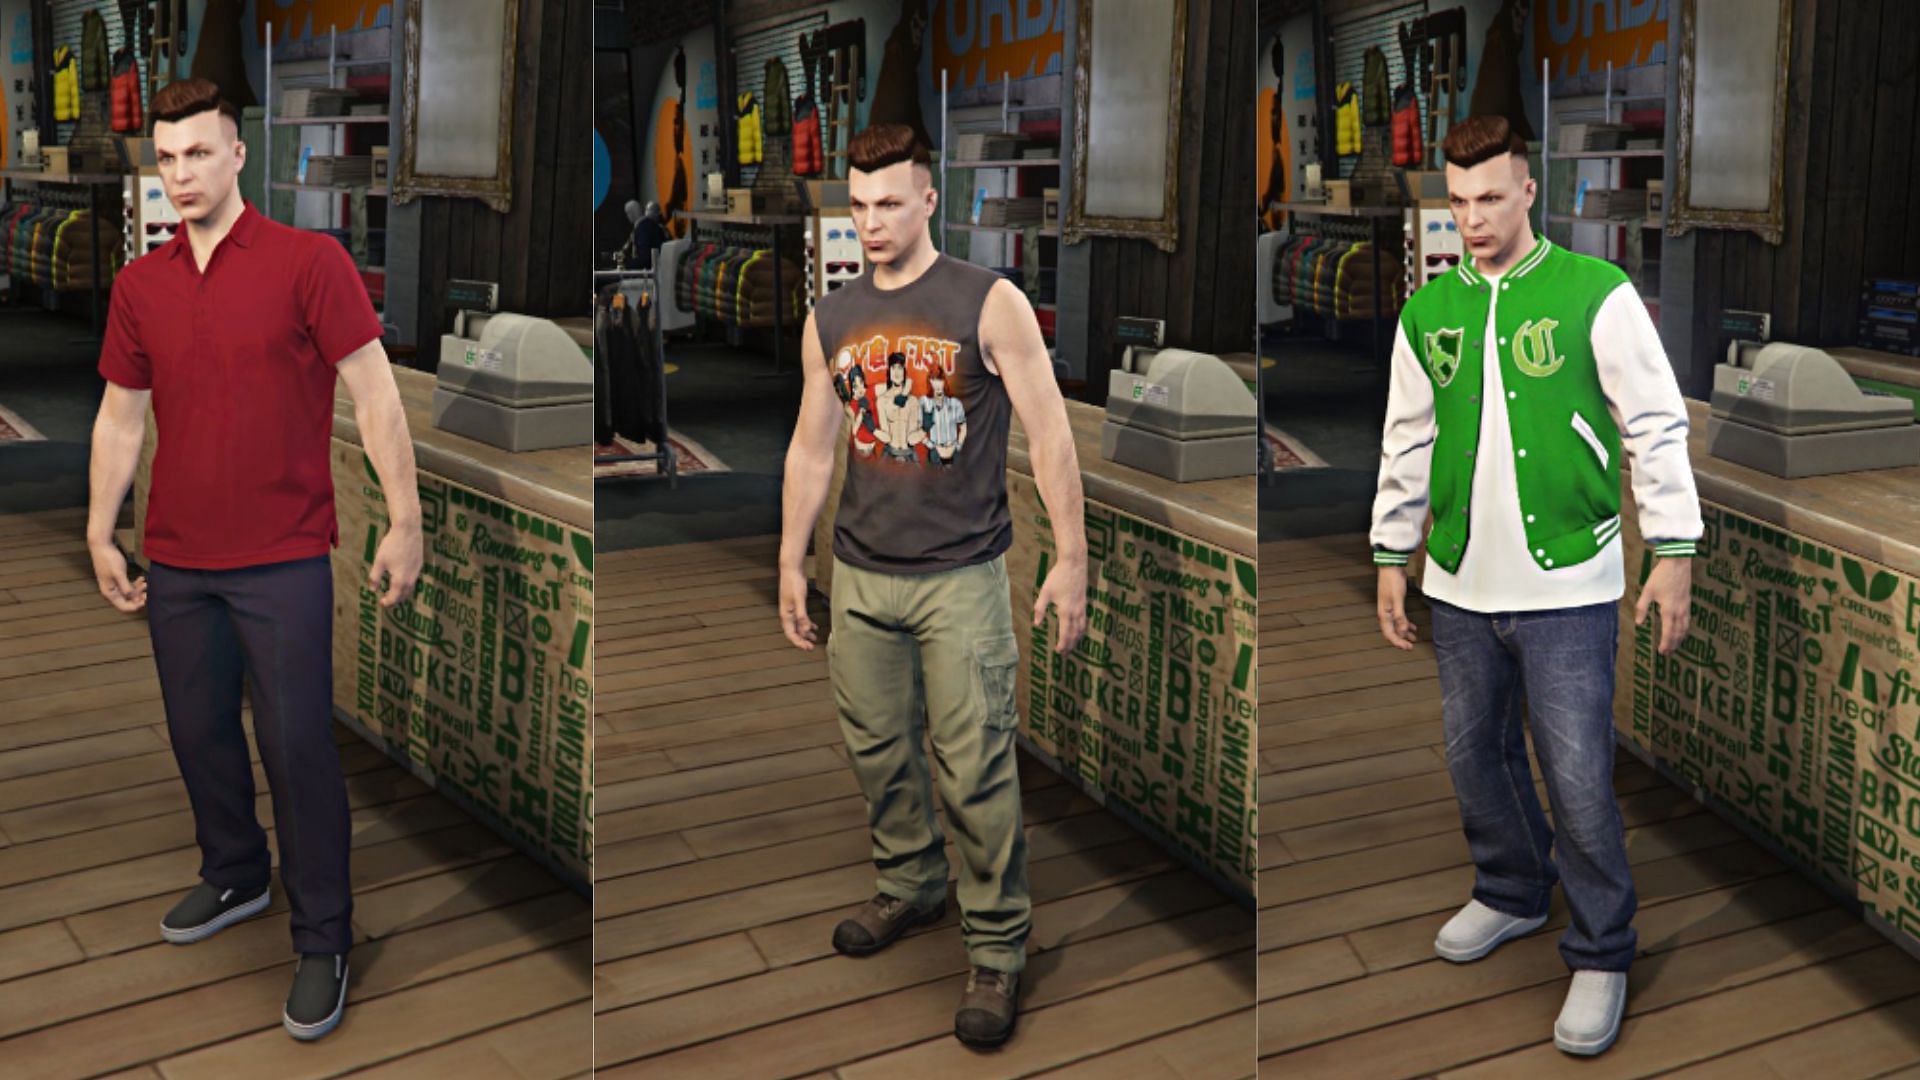 Michael, Trevor, and Franklin&#039;s outfits from left to right (Images via Twitter/TezFunz2)